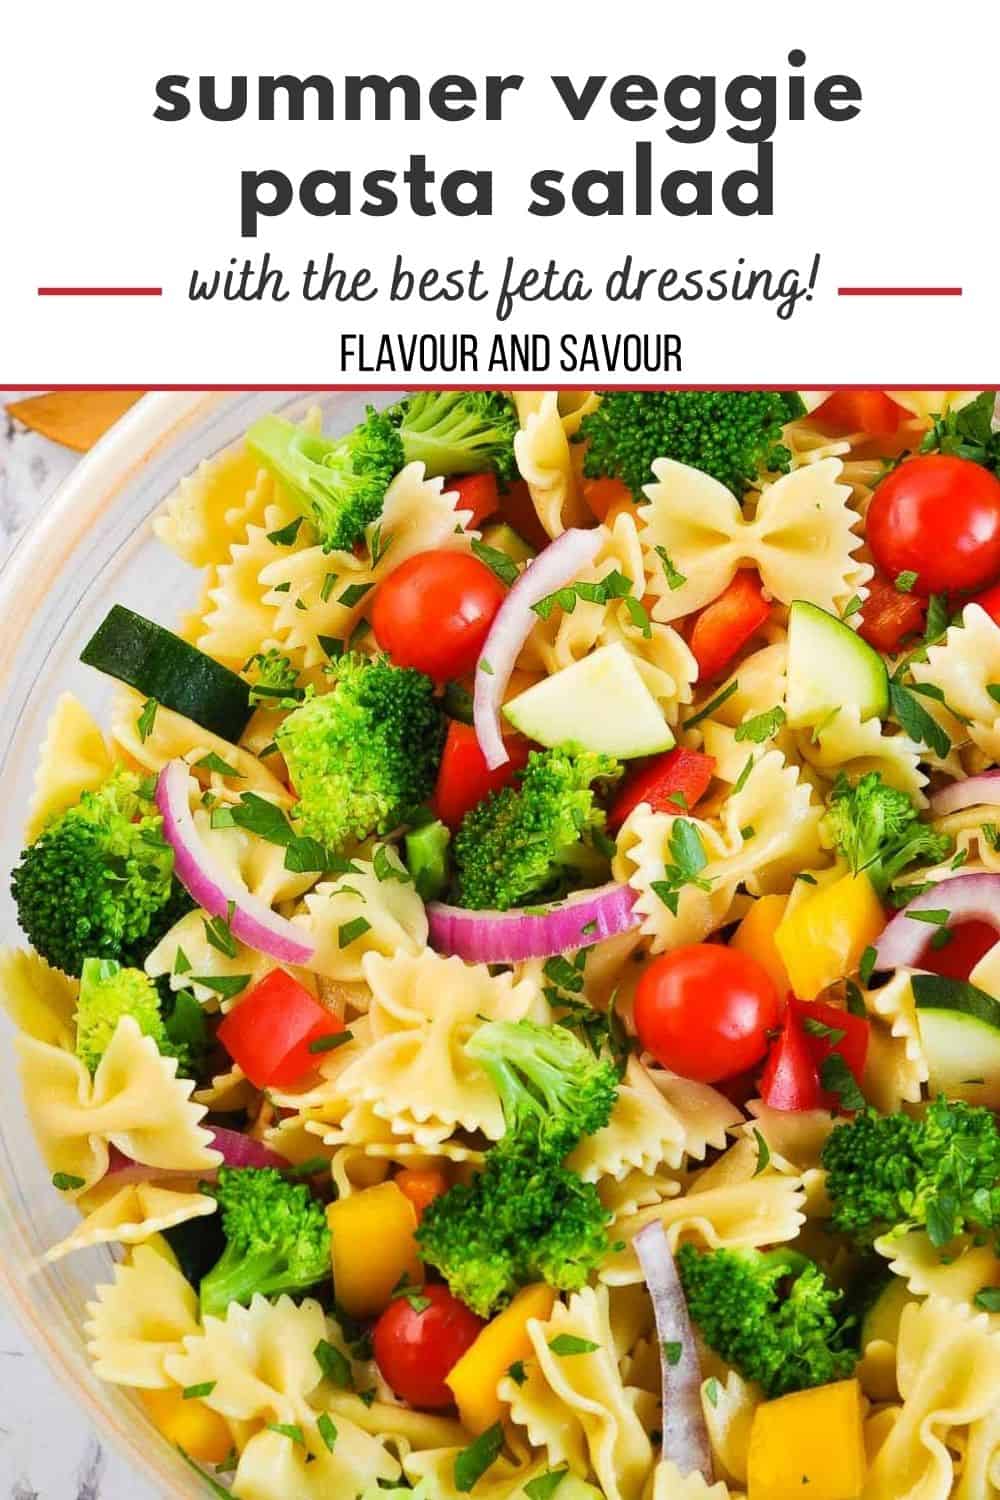 image and text for summer veggie pasta salad